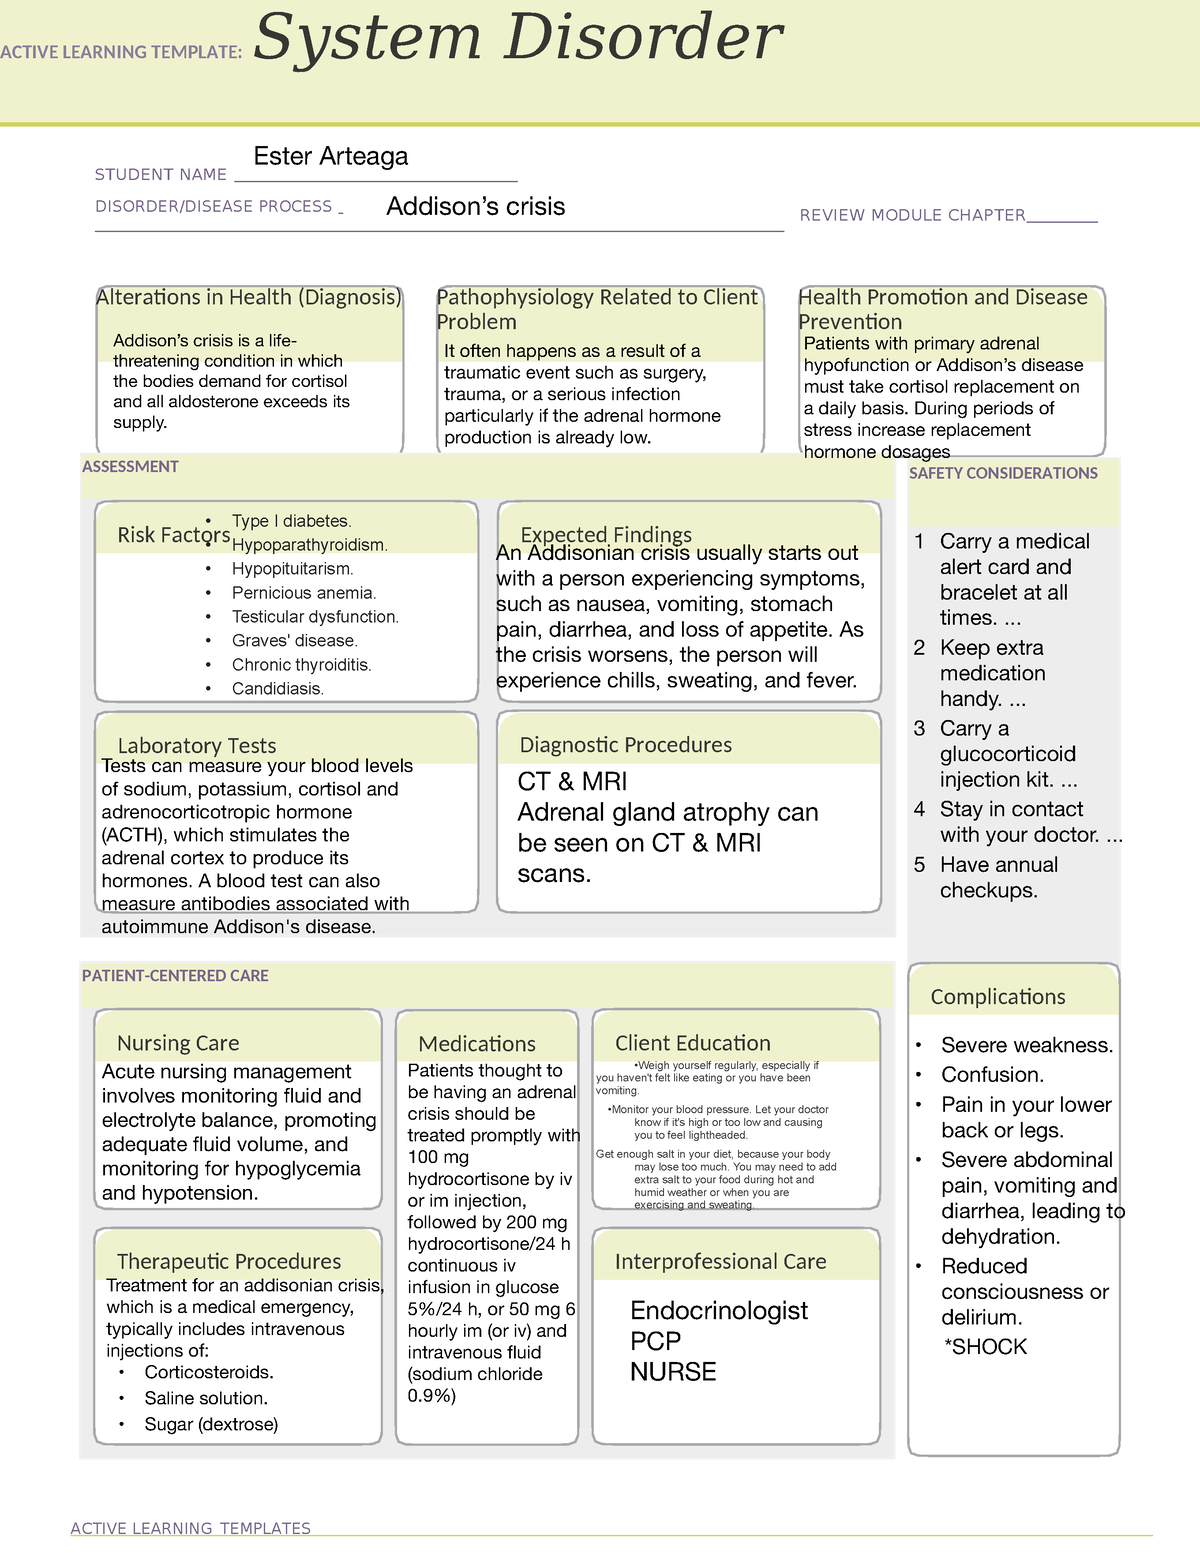 addison-s-crisis-active-learning-template-system-disorder-student